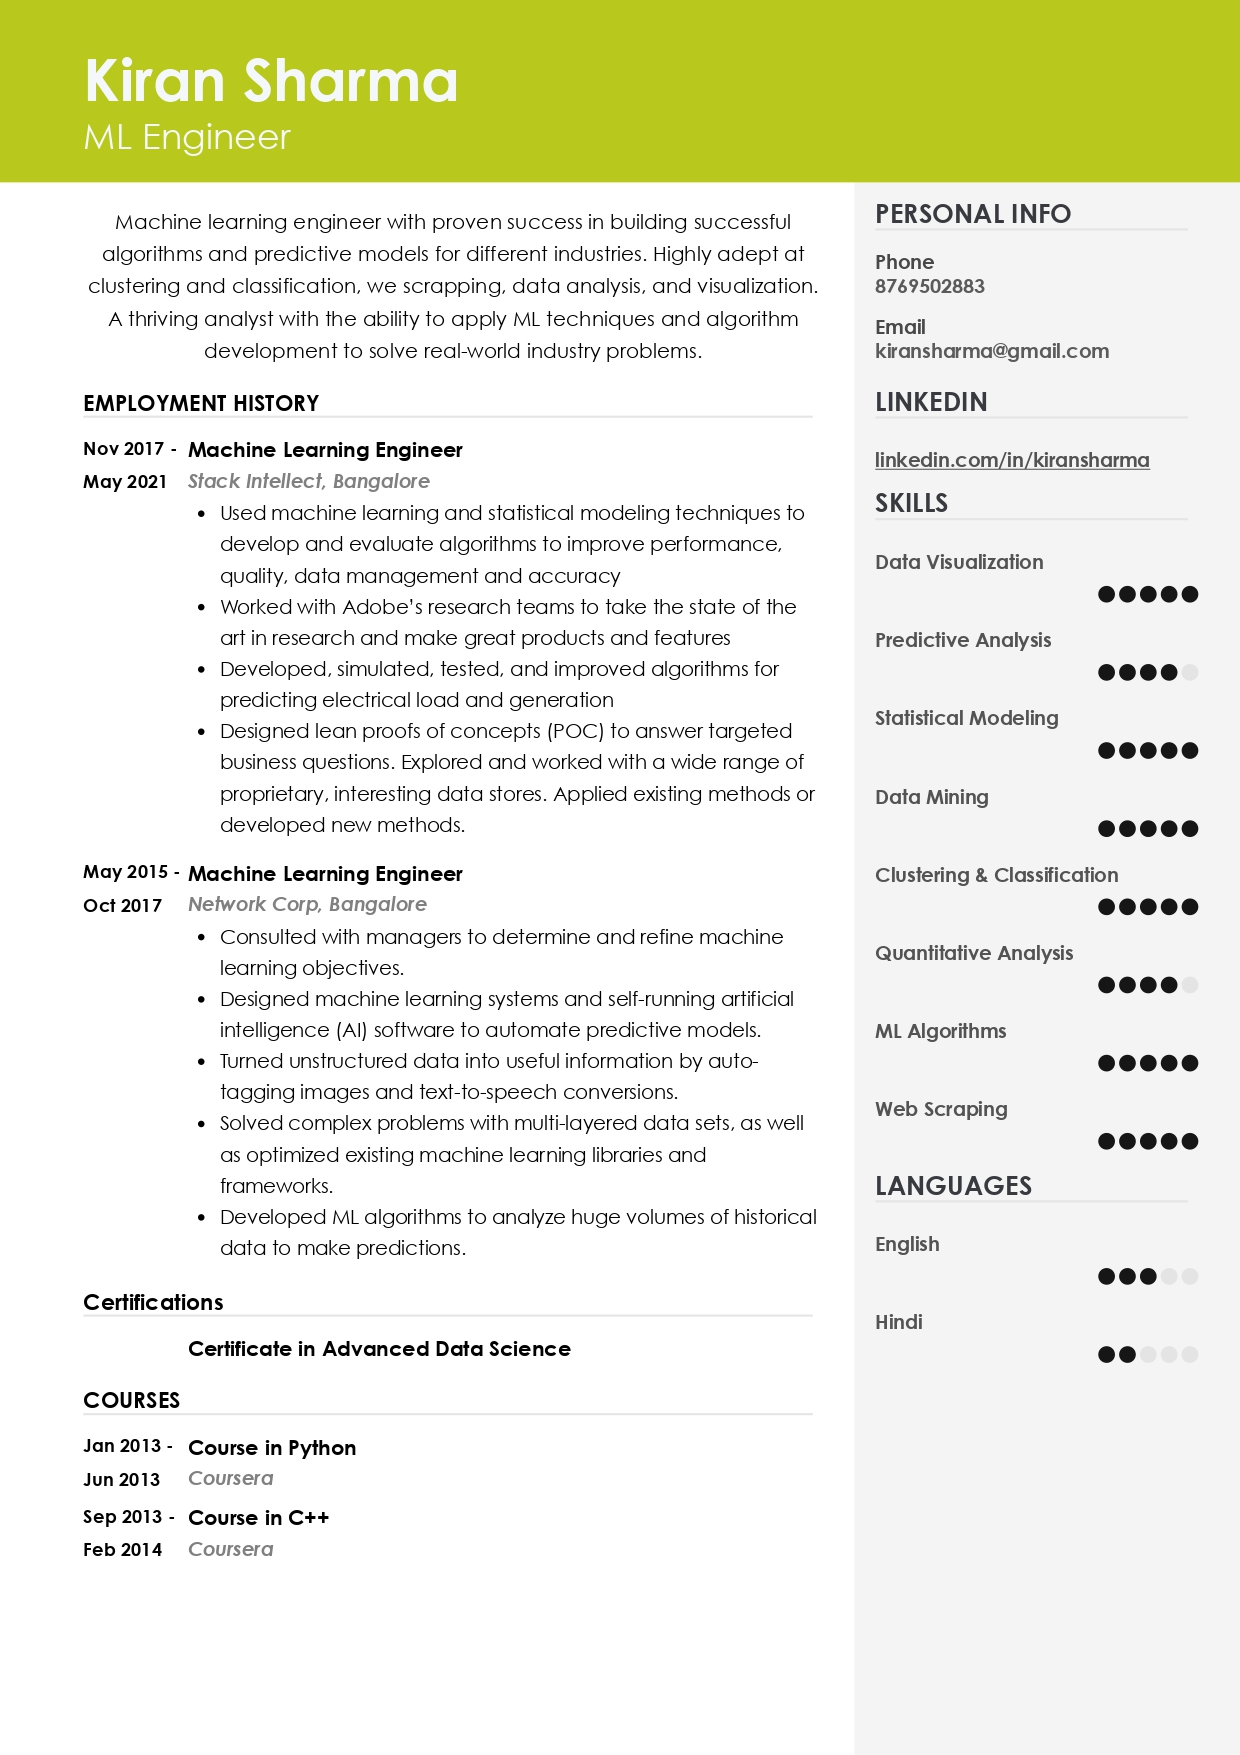 Crafting Your Big Data Resume + 5 Big Data Projects to Include